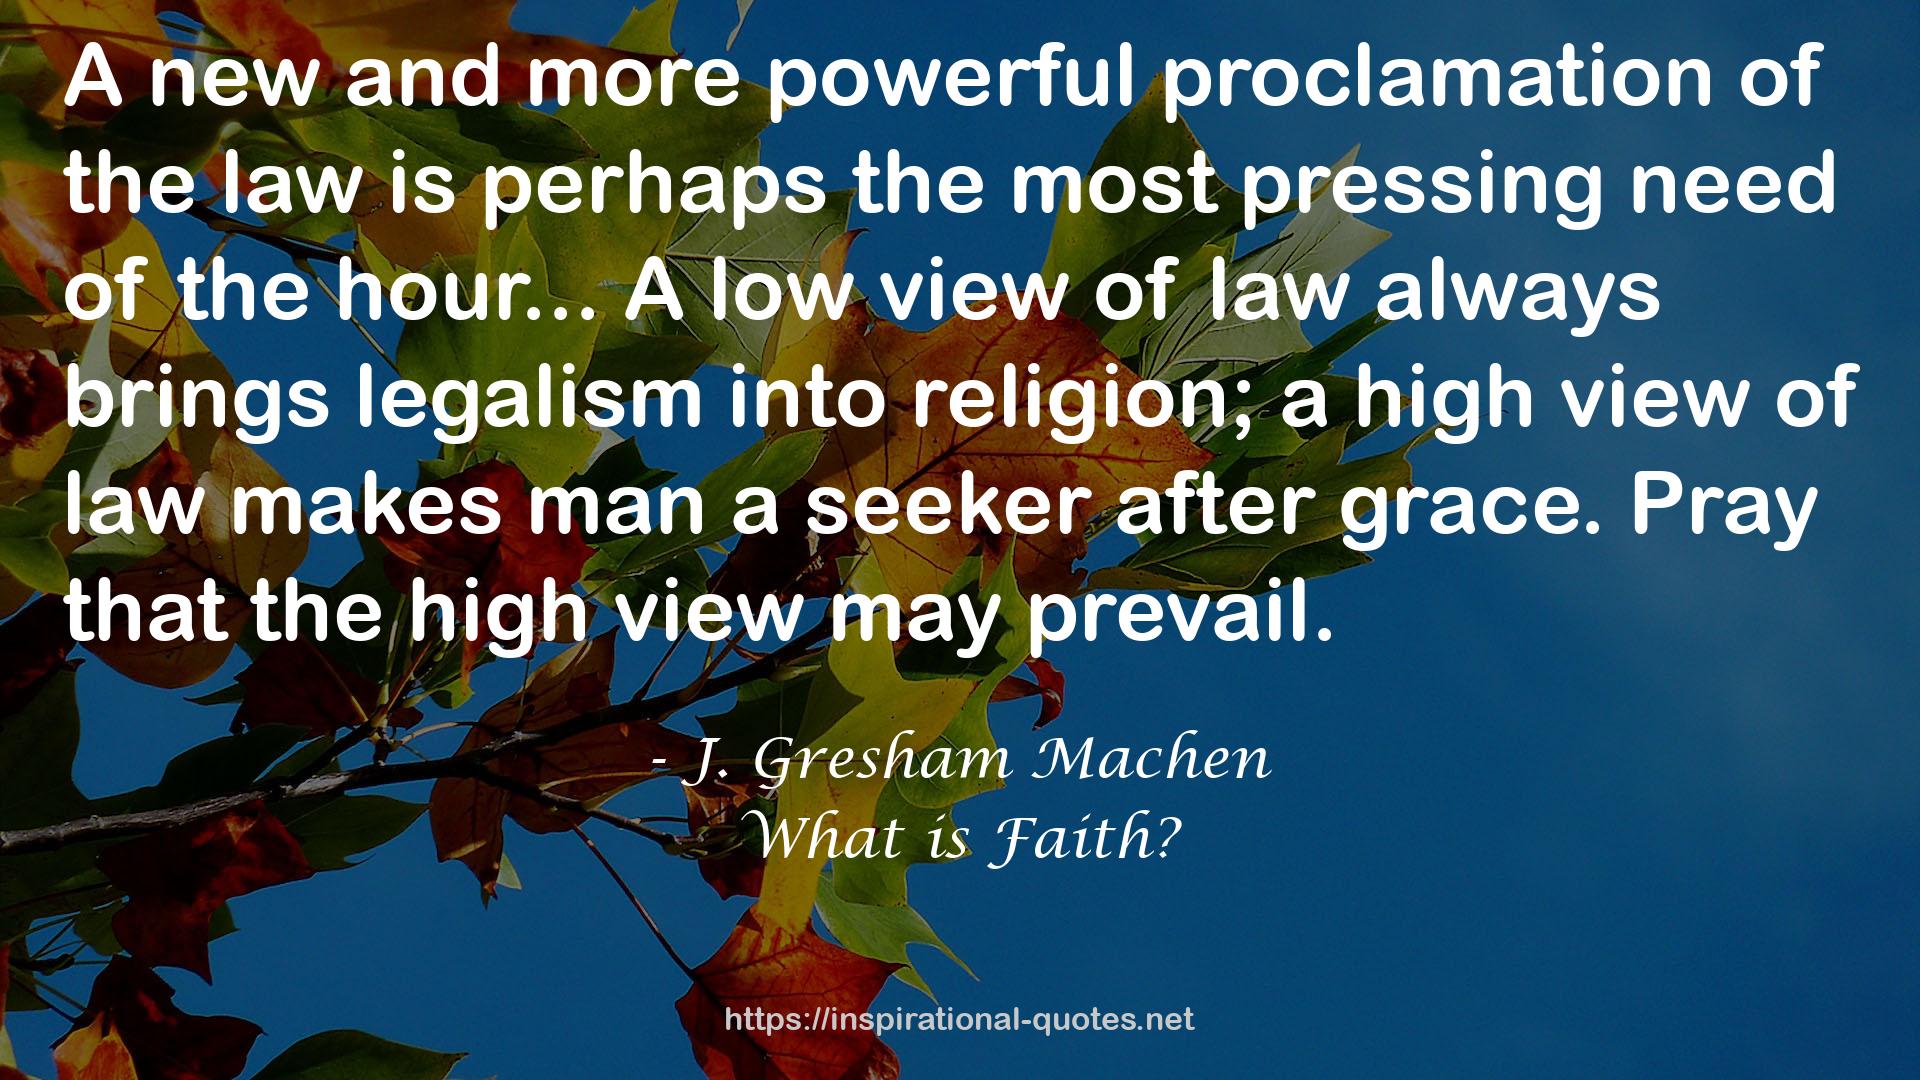 What is Faith? QUOTES